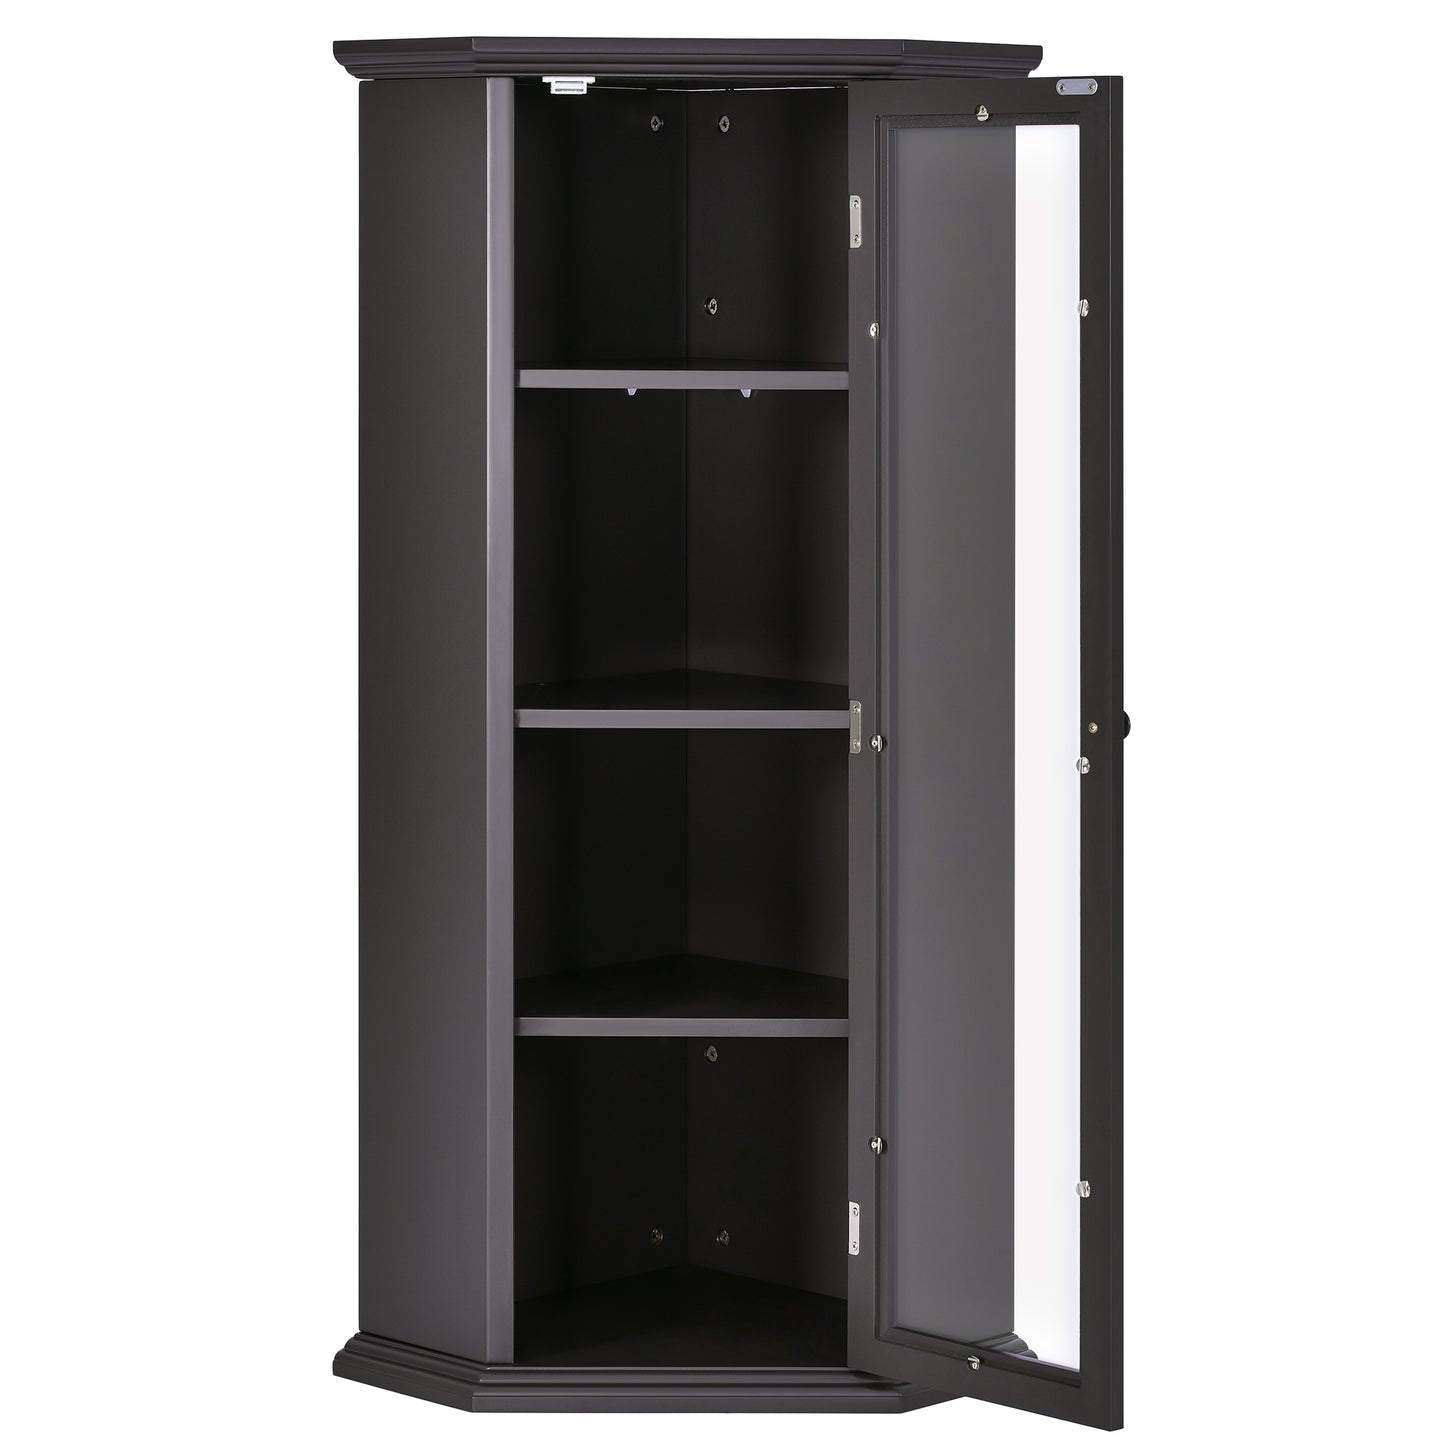 Freestanding Bathroom Cabinet with Glass Door, Corner Storage Cabinet for Bathroom, Living Room and Kitchen, MDF Board with Painted Finish, Black Brown